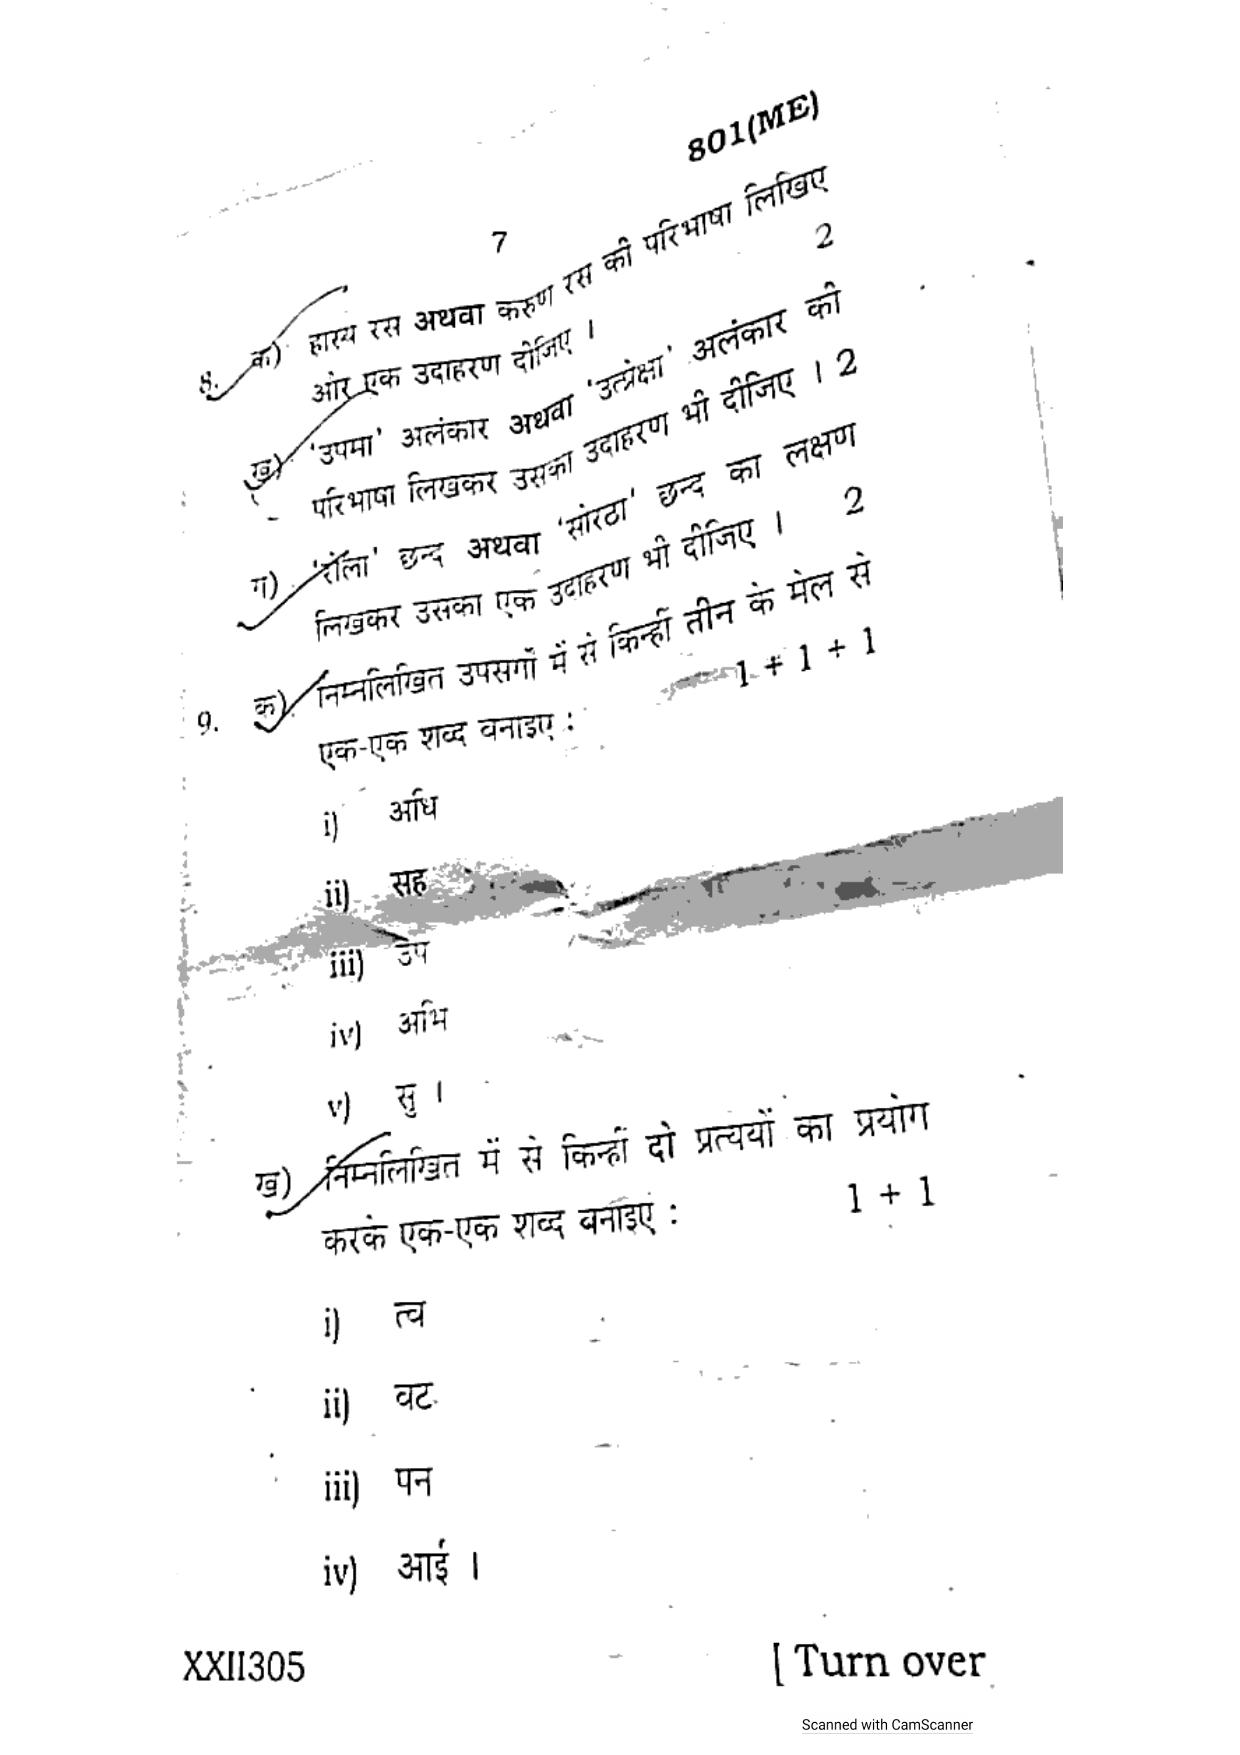 UP Board Previous Year Question Paper Class 10 Hindi (801 ME) – 2020 - Page 7